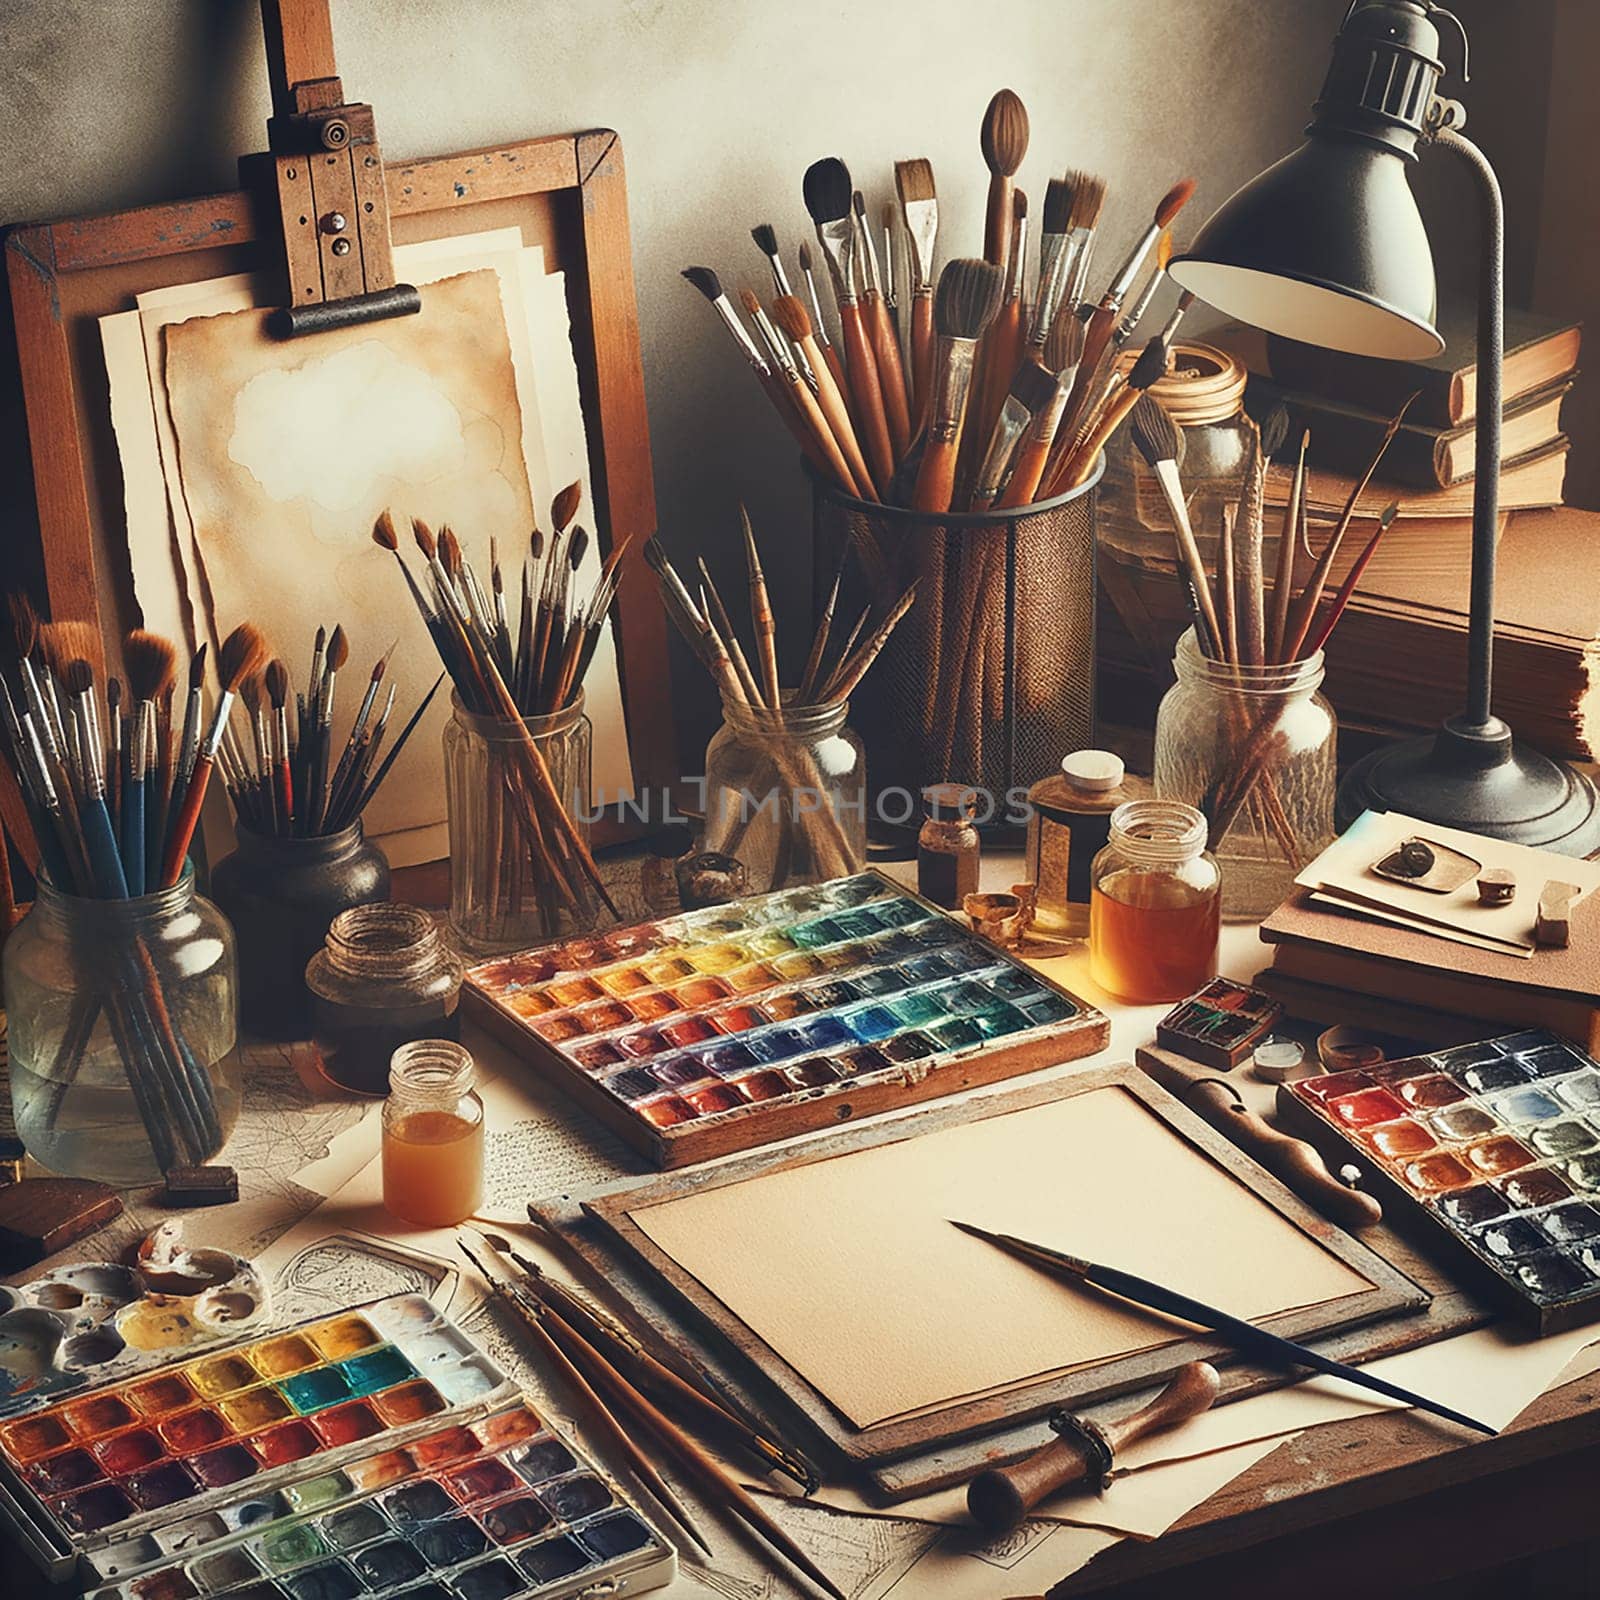 Immerse in Creativity: Artistic Workplace with Vintage Style by Petrichor